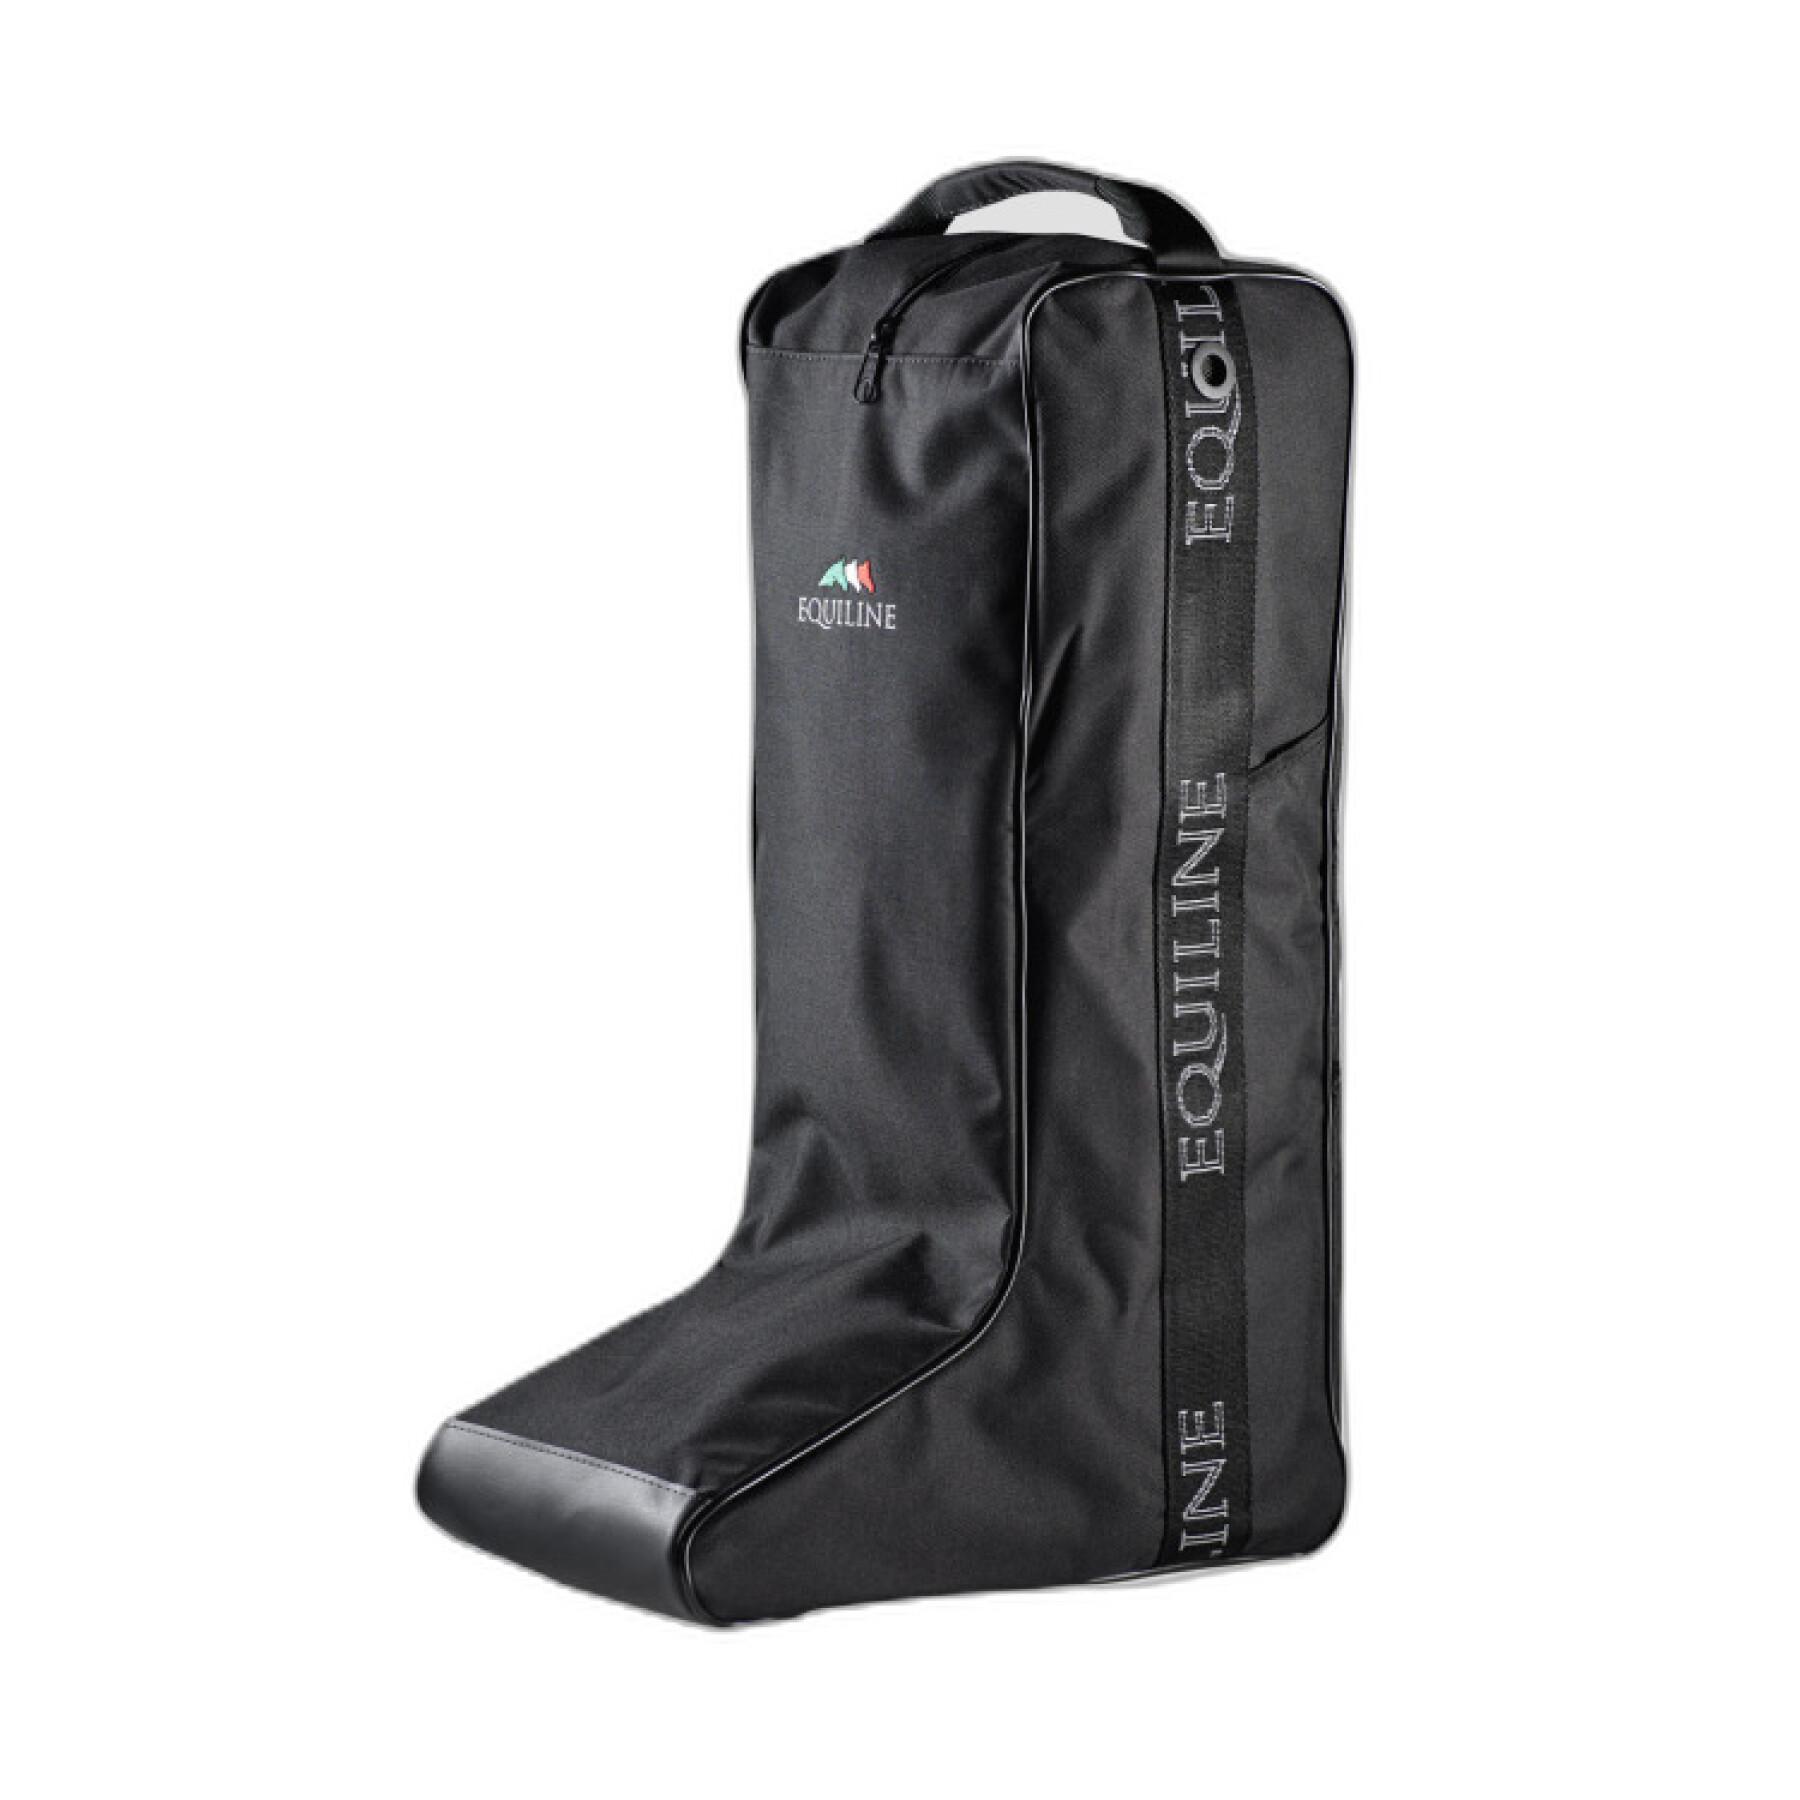 Riding boot bag Equiline